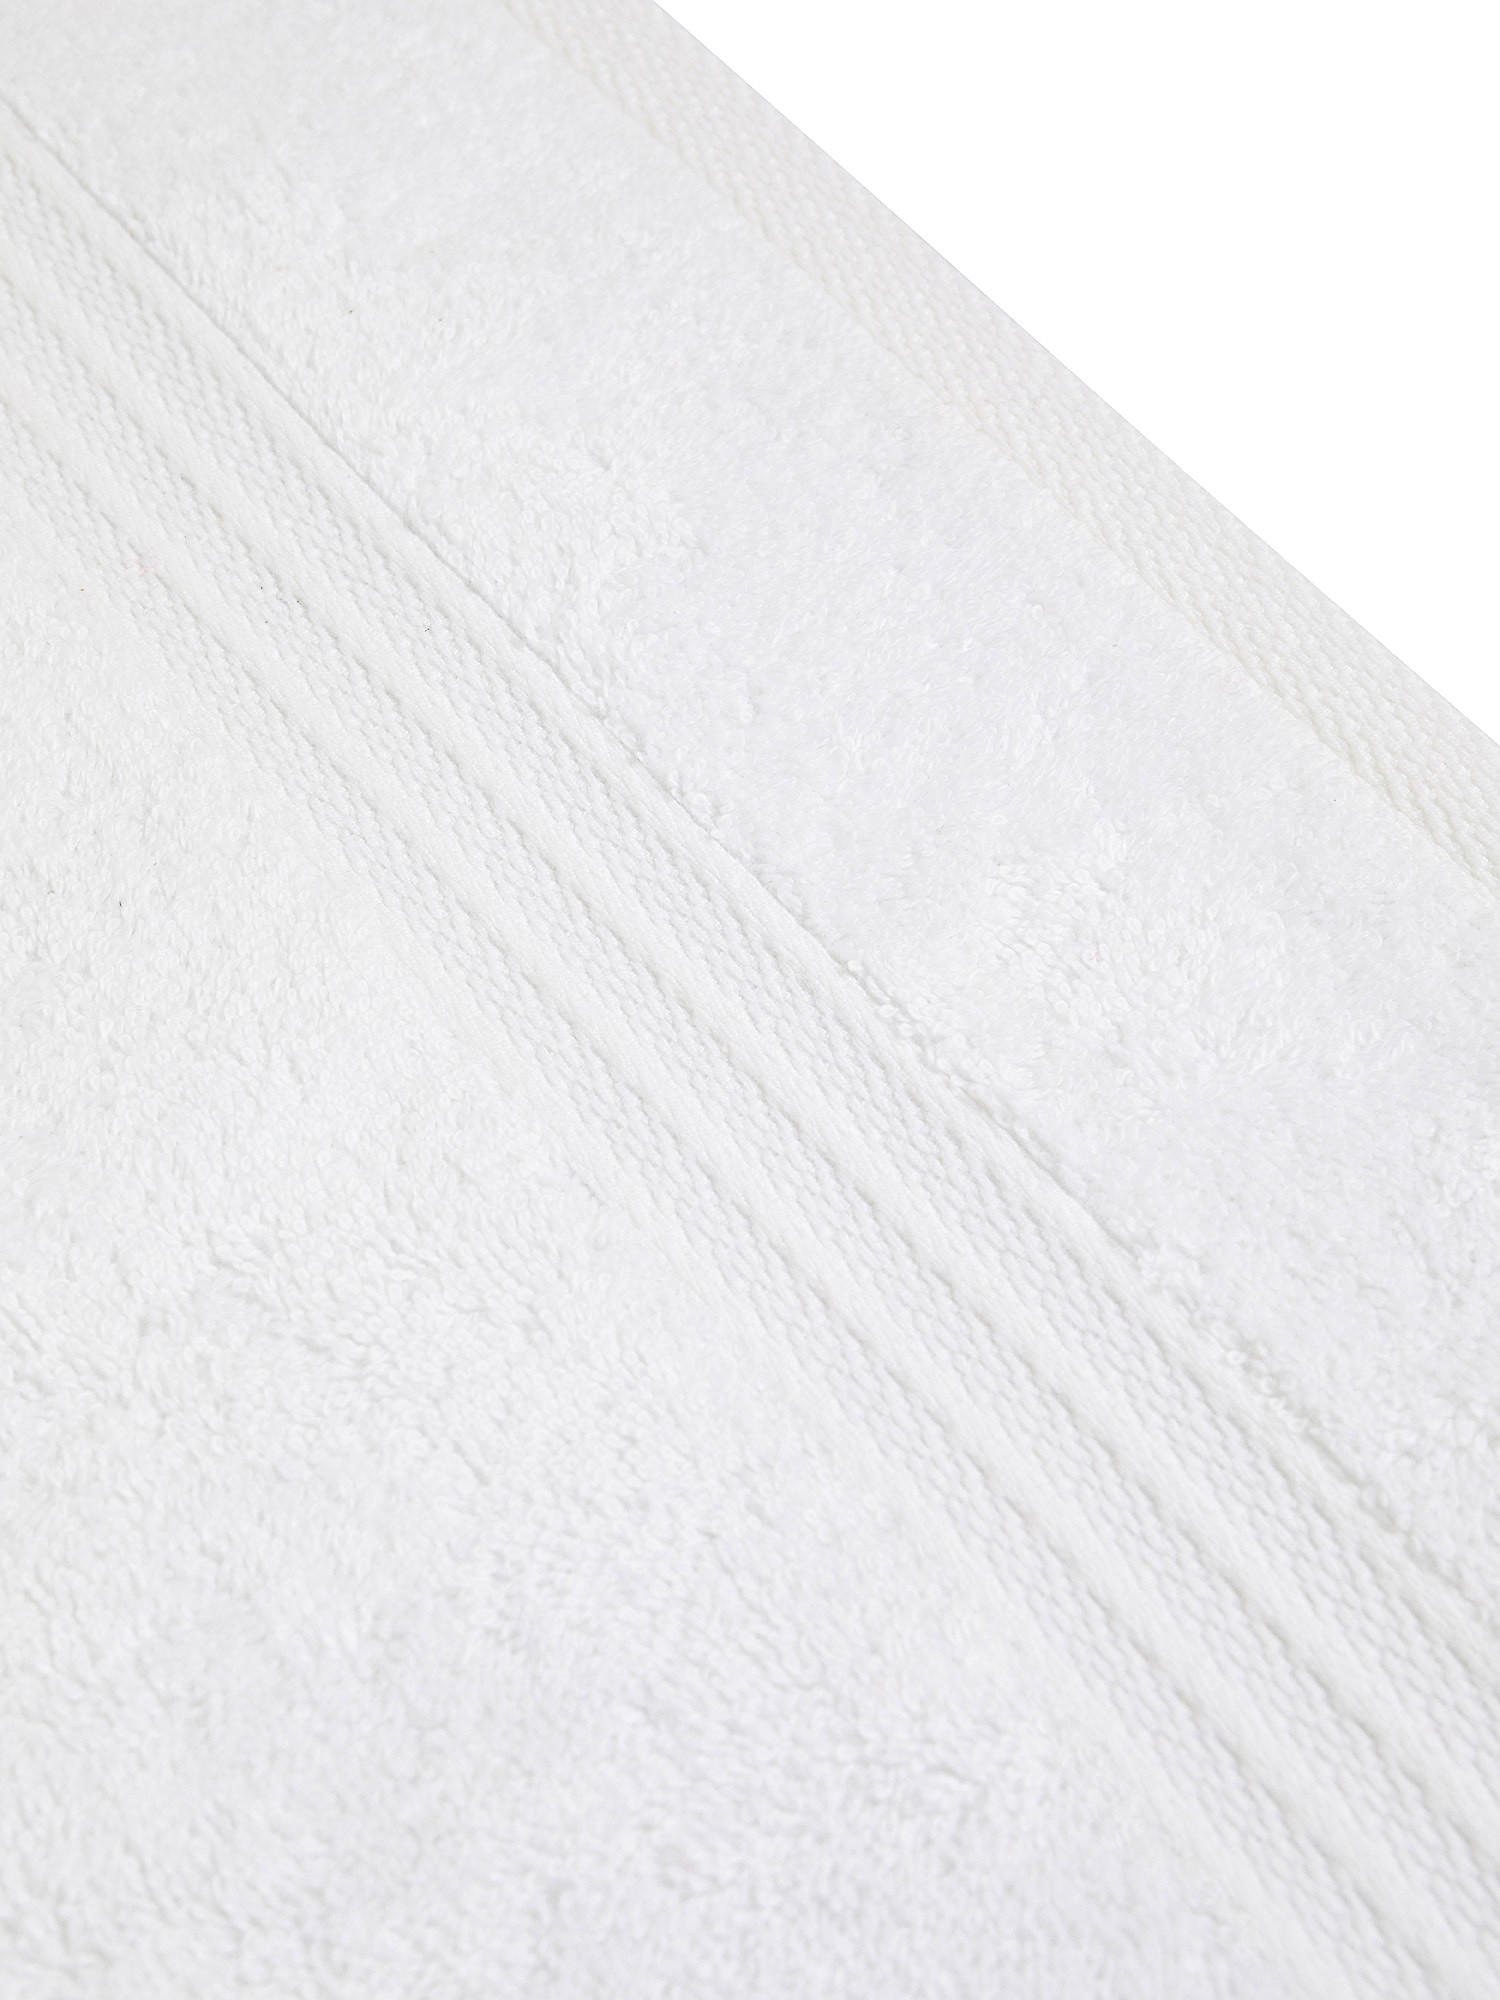 Zefiro solid color 100% cotton towel, White, large image number 2